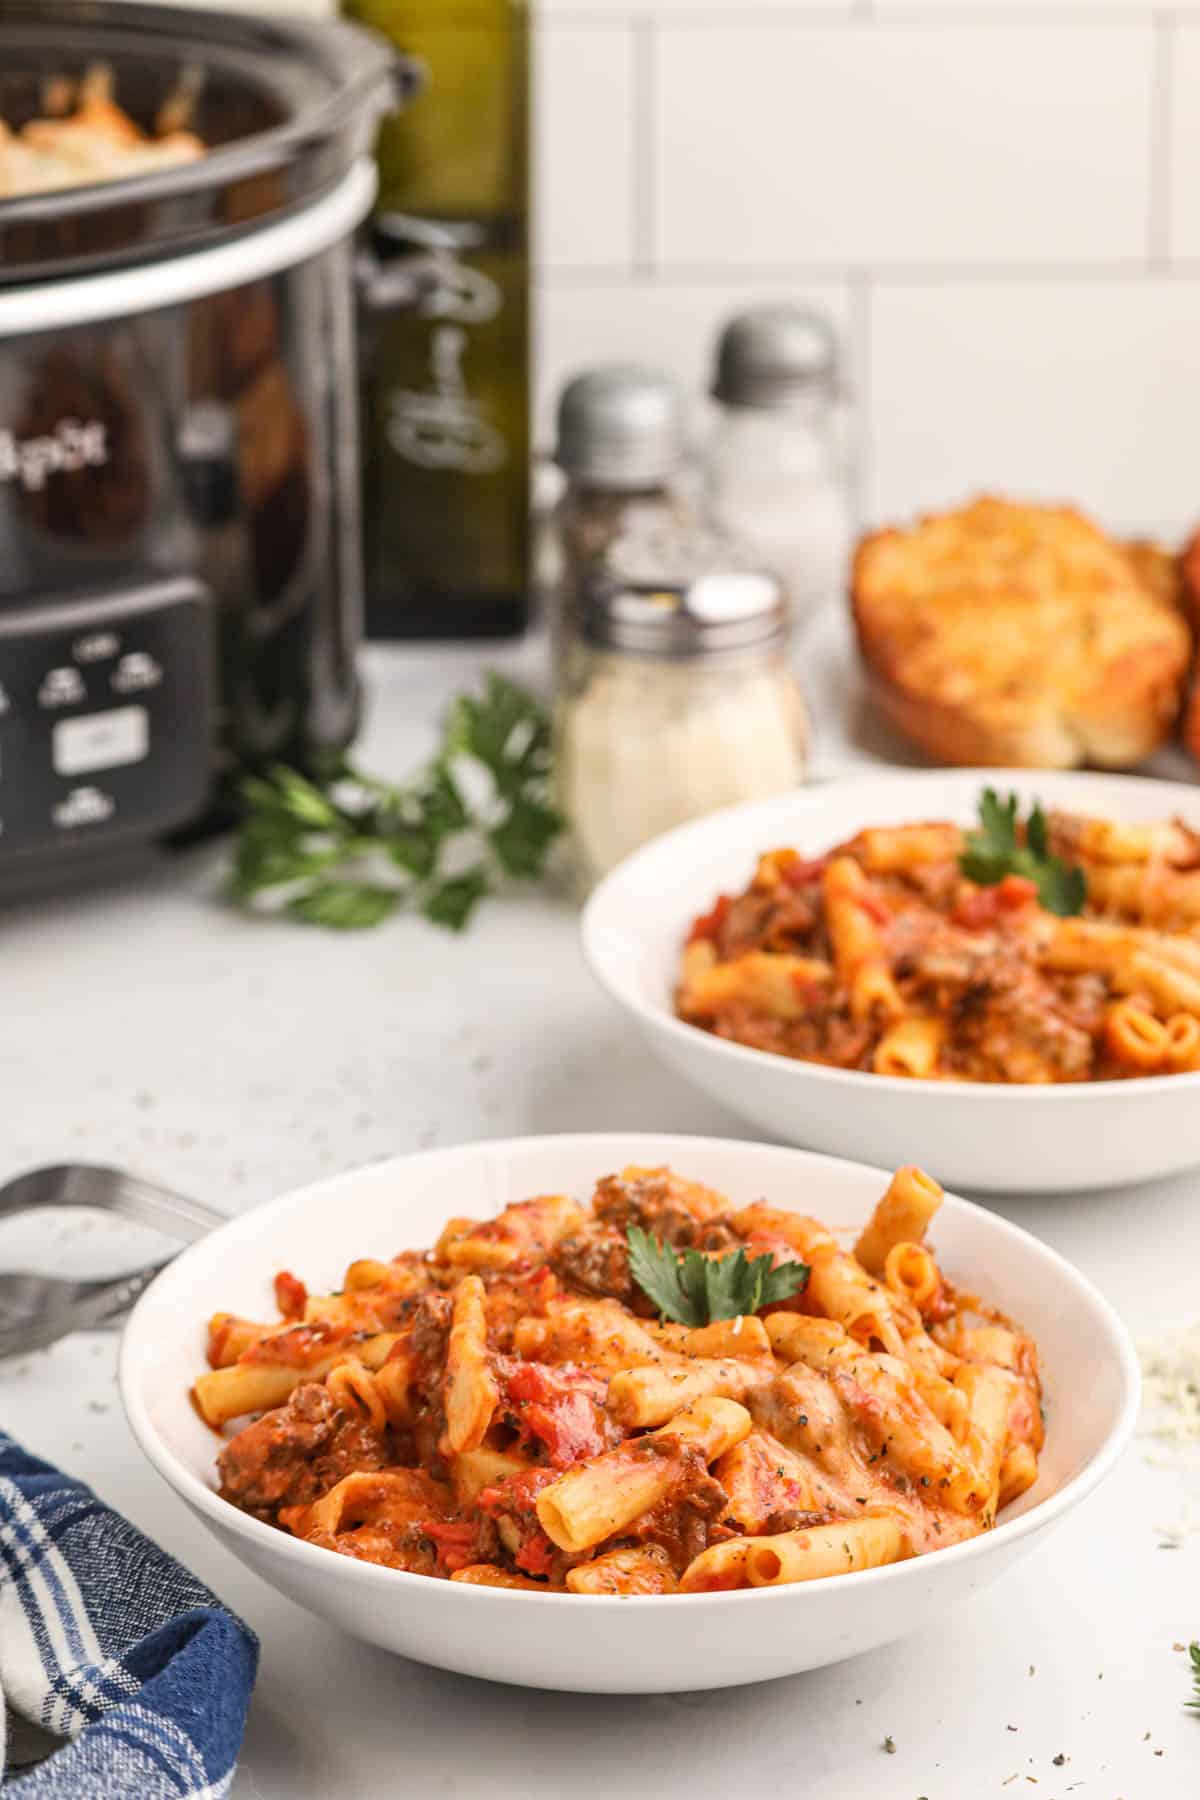 Bowls of baked ziti pasta in front of a slow cooker.